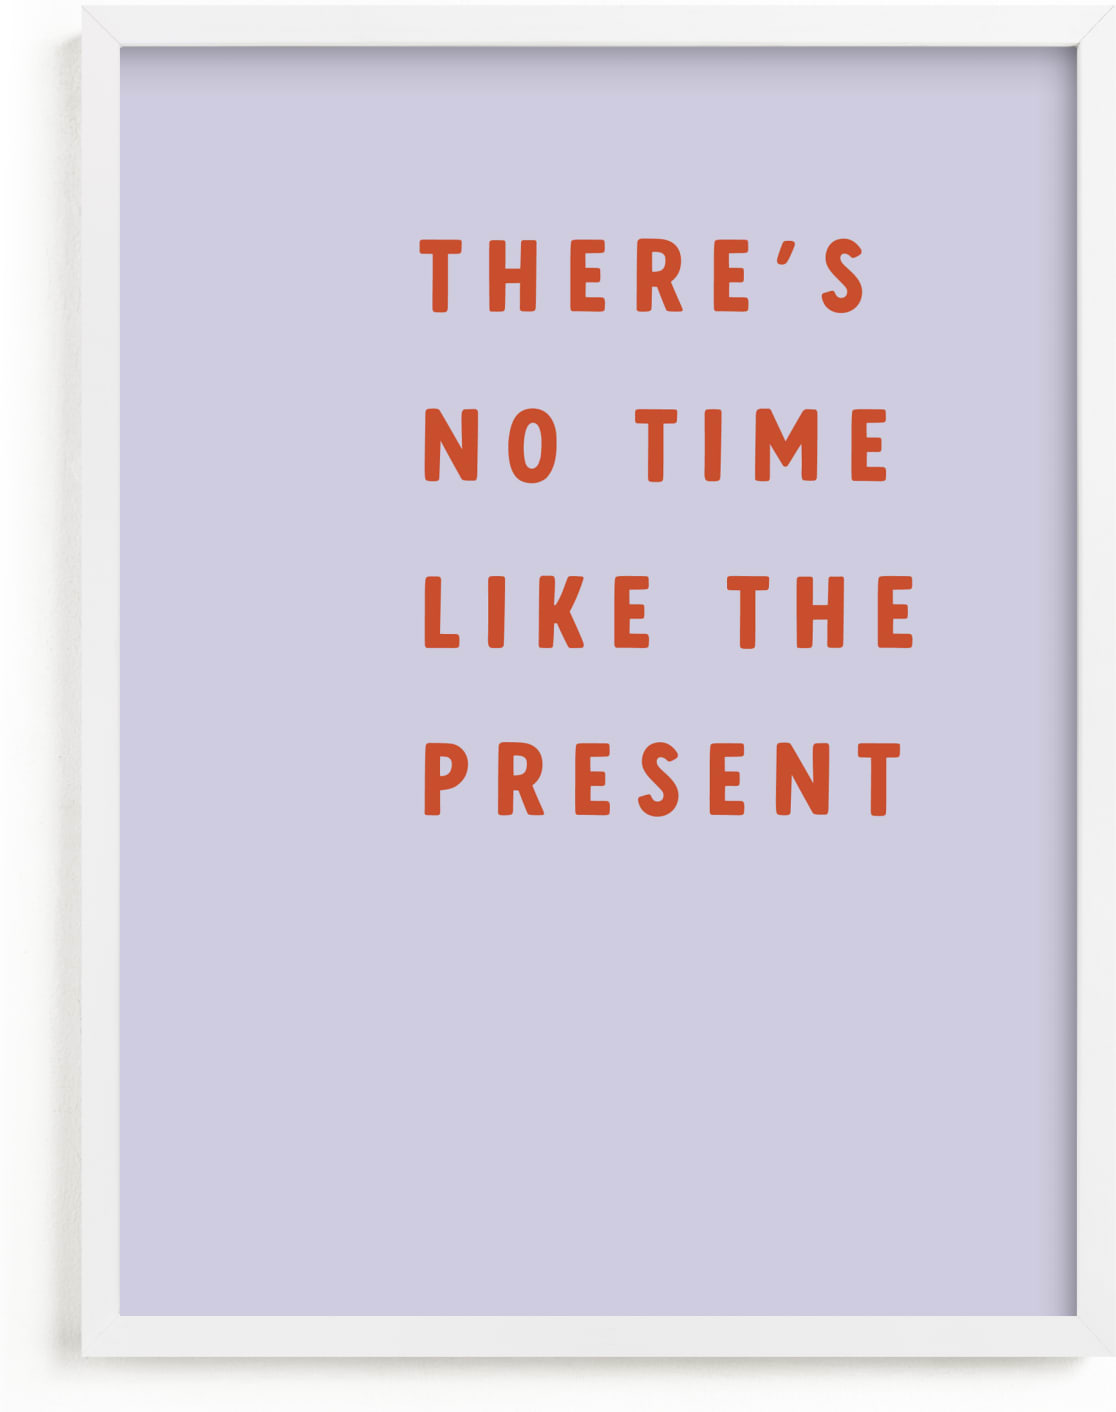 This is a purple kids wall art by Angela Garrick called The Present.